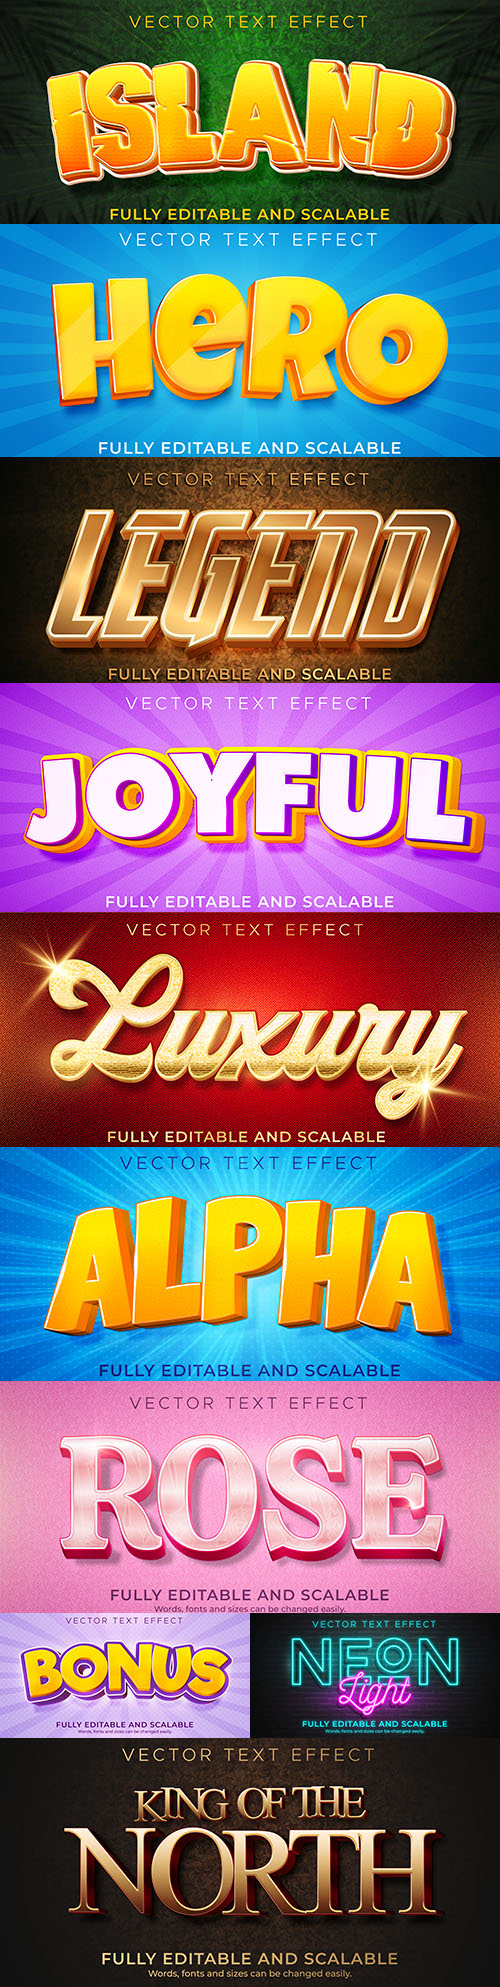 Editable font and 3d effect text design collection illustration 32
